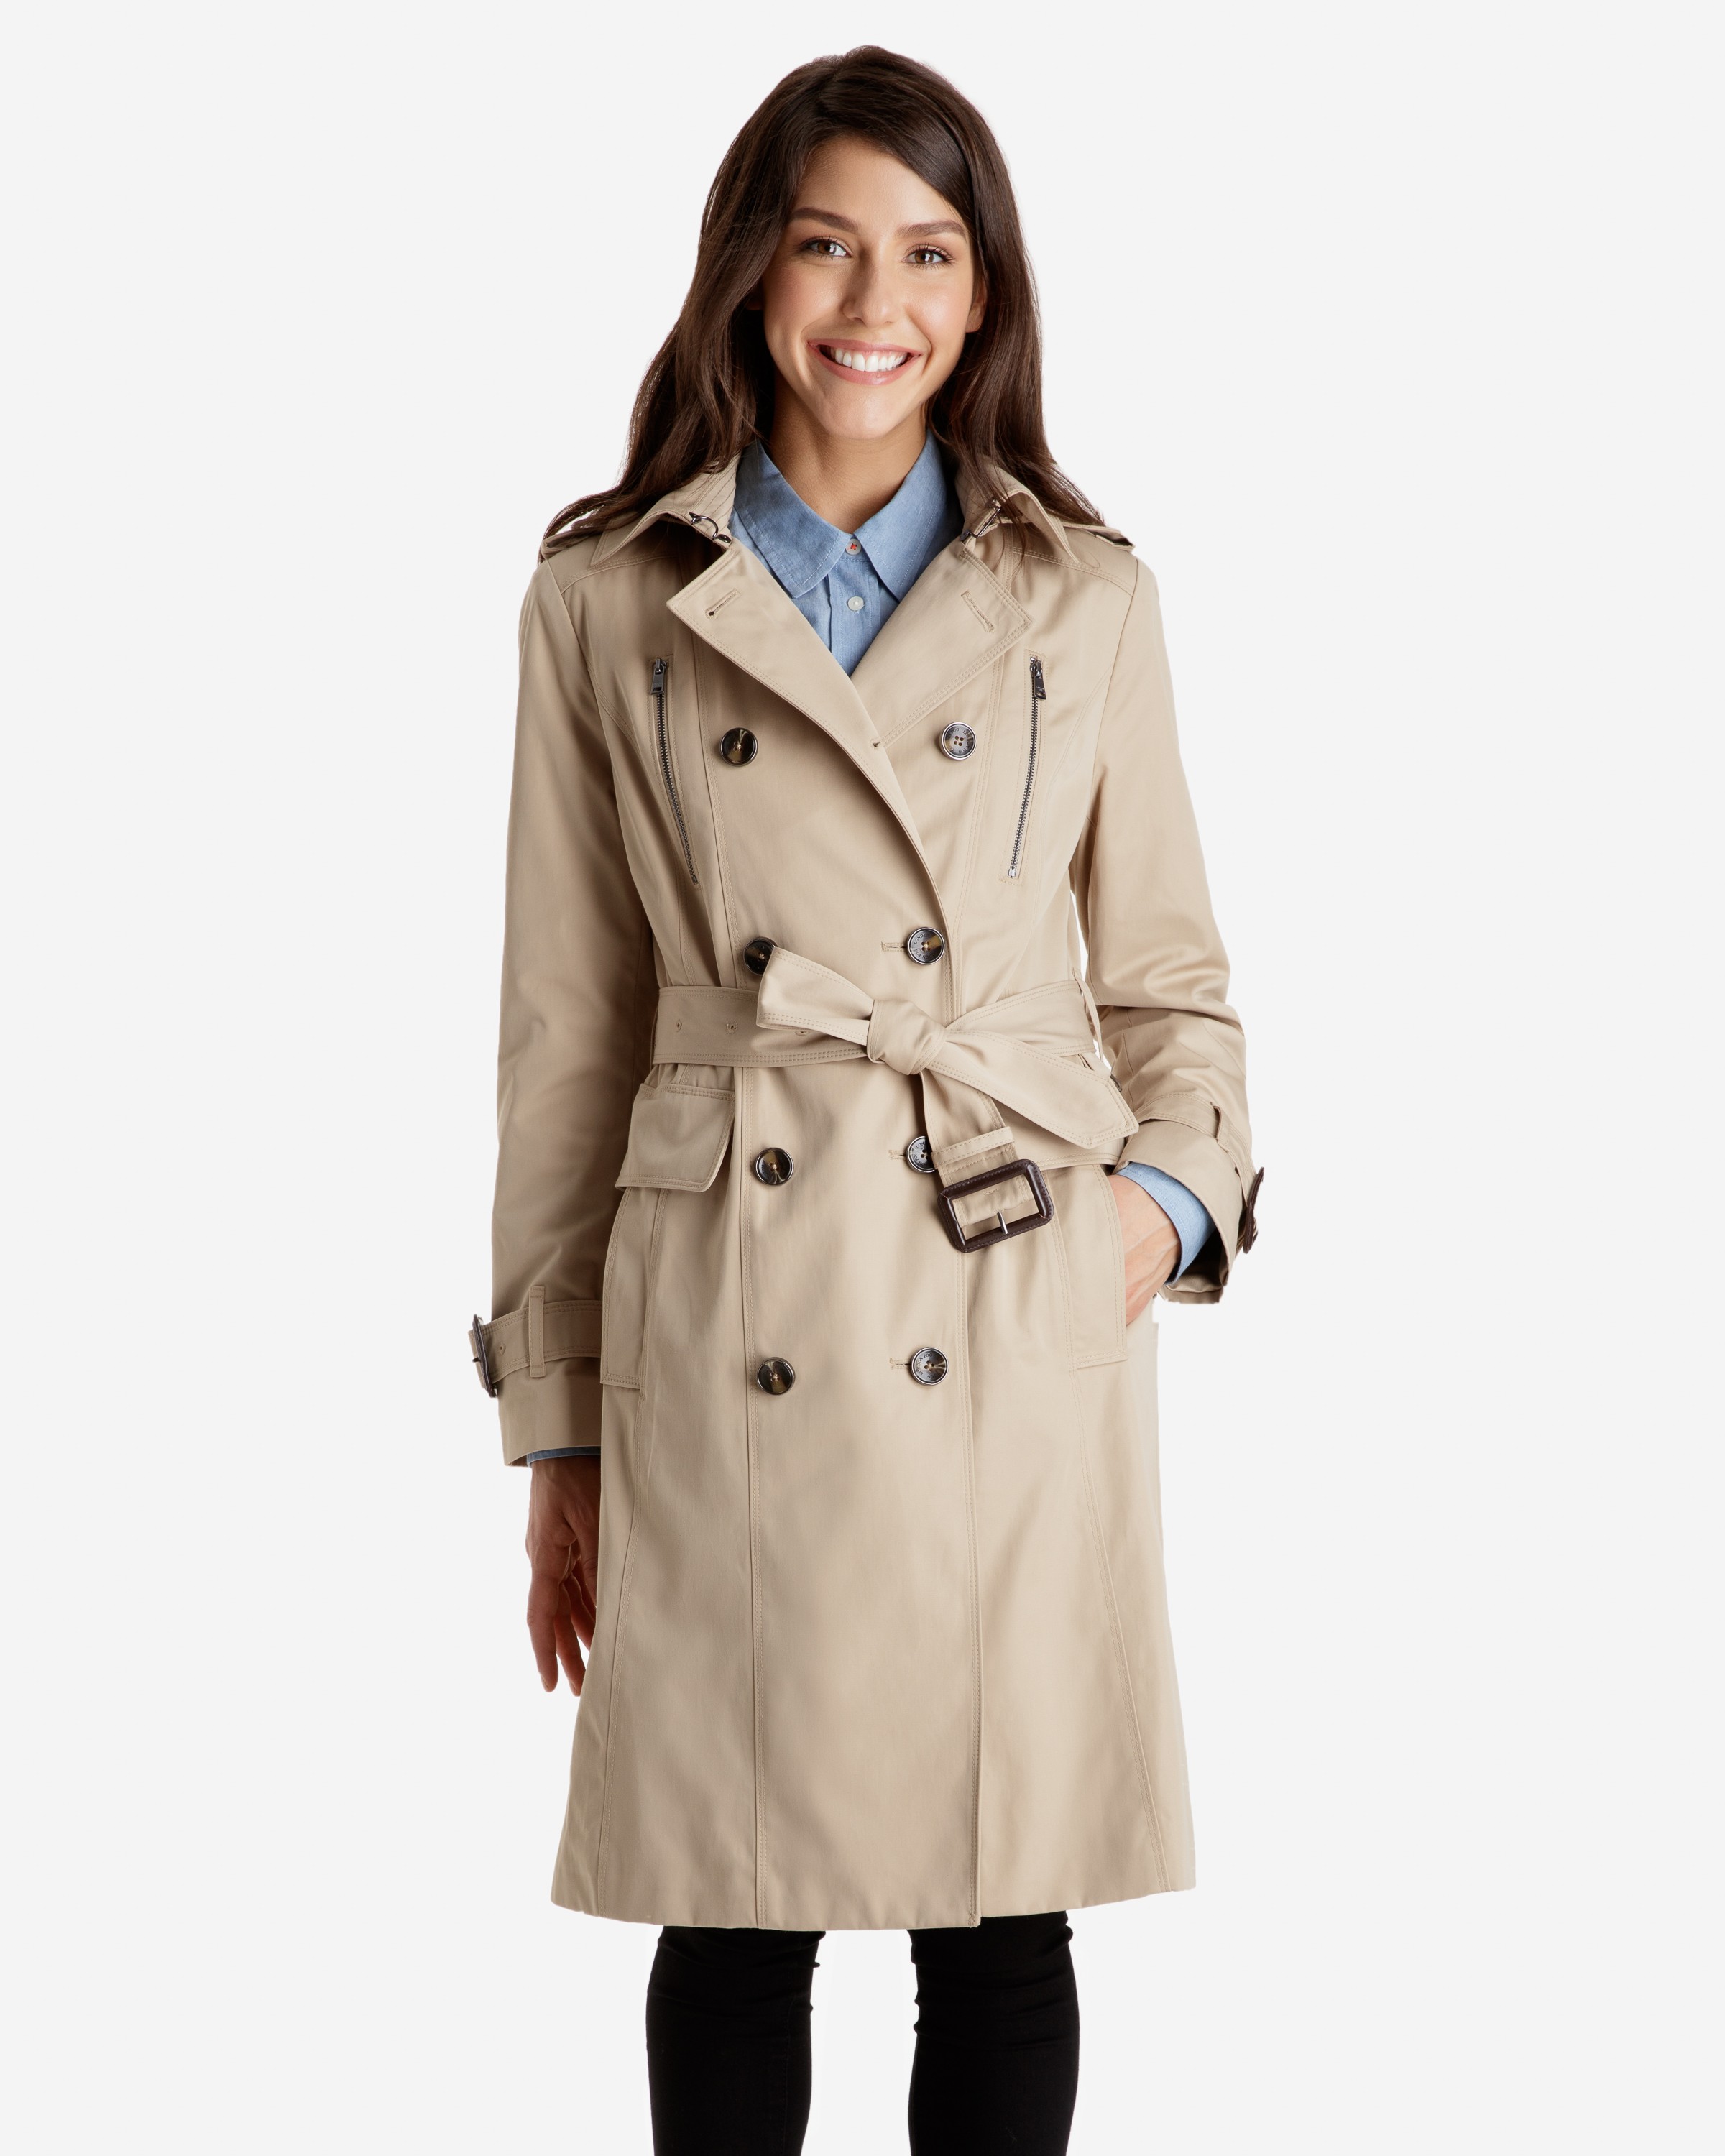 How to select Best ladies trench coat for this winter - StyleSkier.com